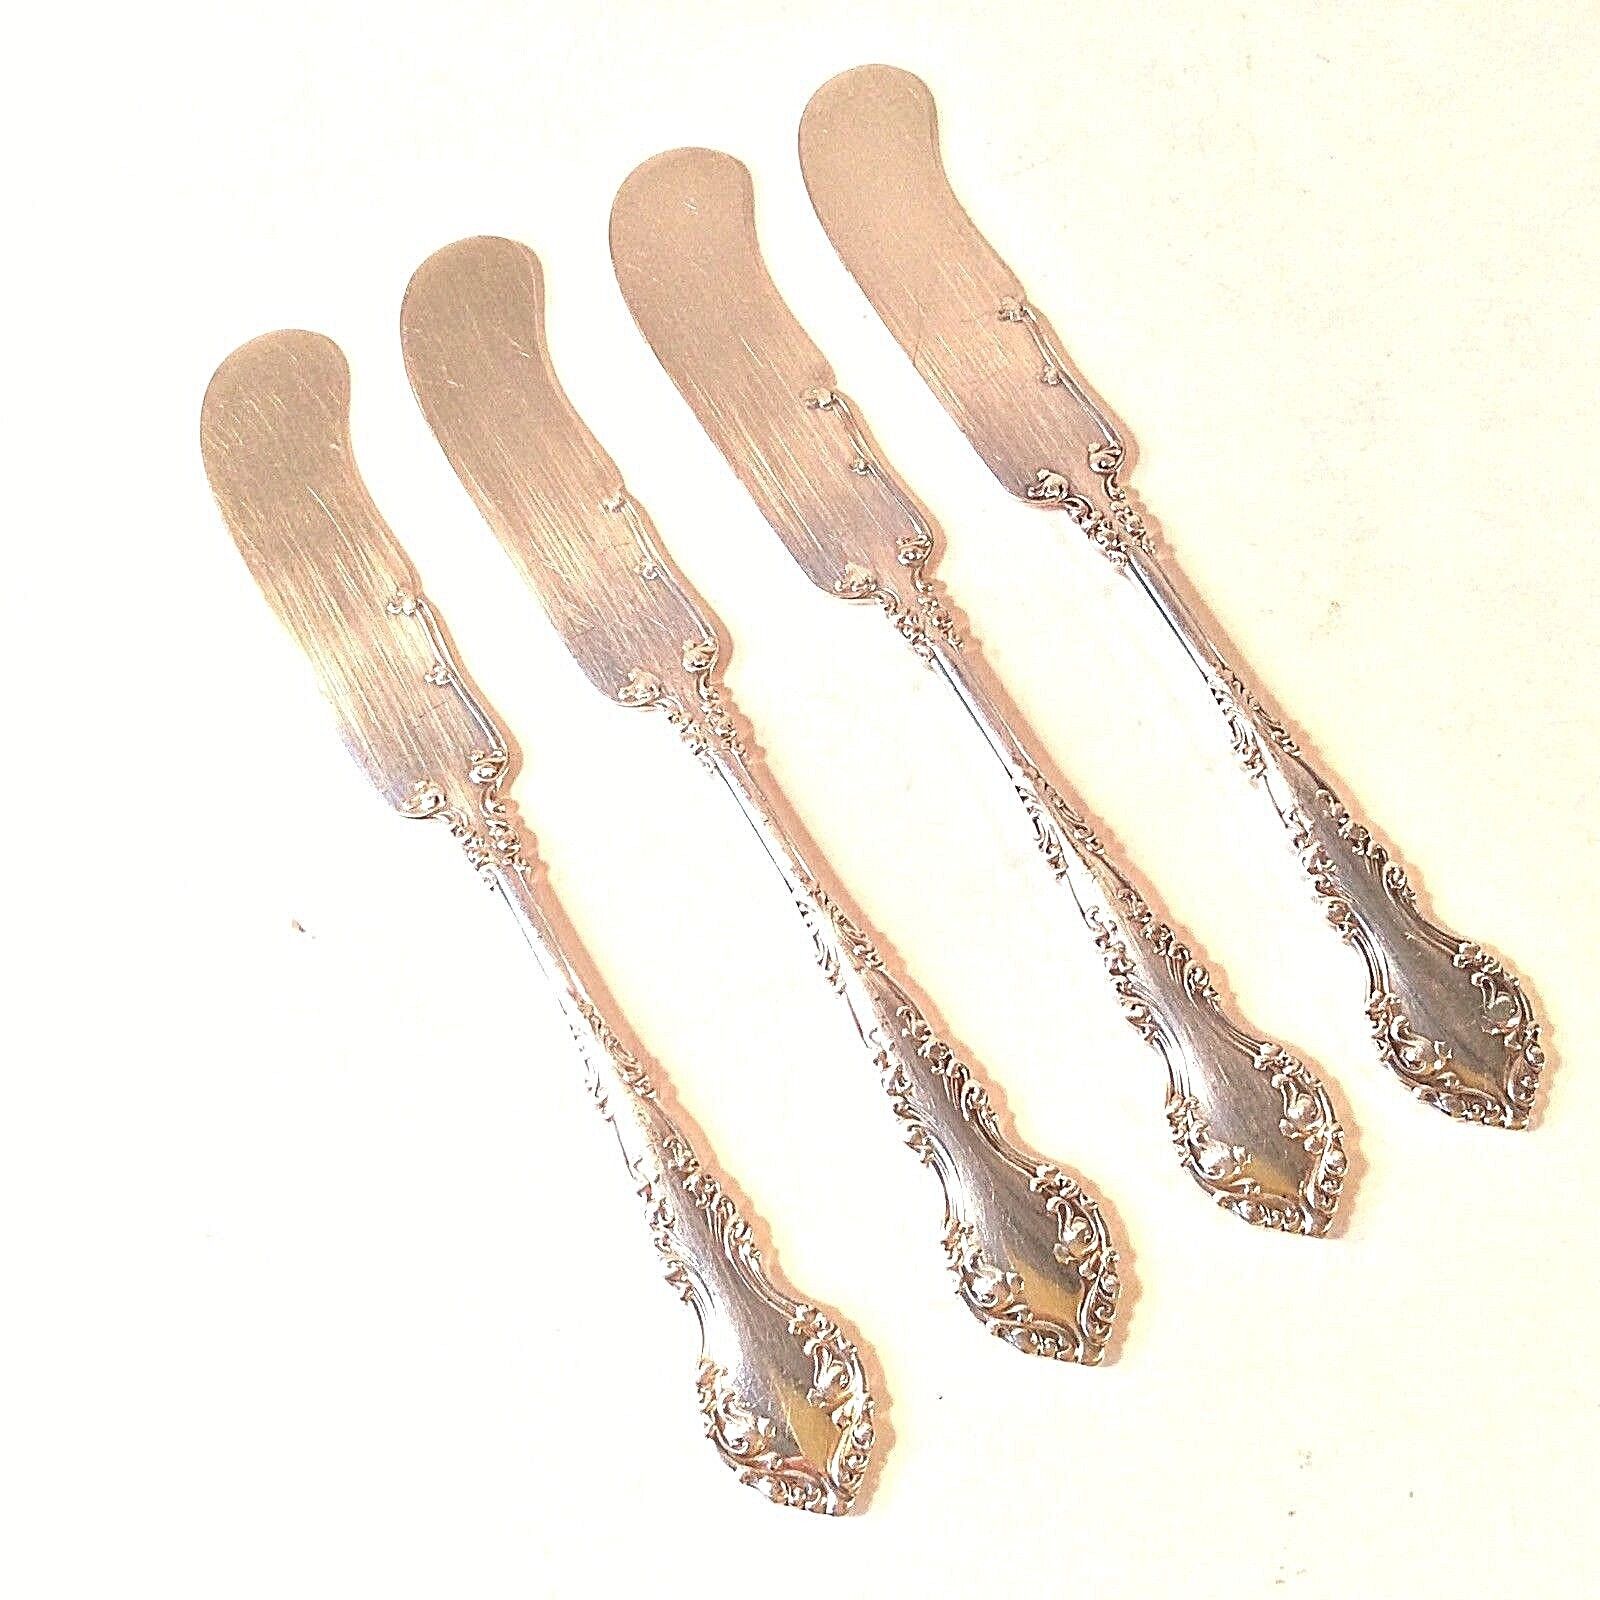 ANTIQUE ROGERS Cheap sale 1898 NEW CENTURY SILVERPLATE 2 Ranking TOP20 4 SPREADERS SE SET